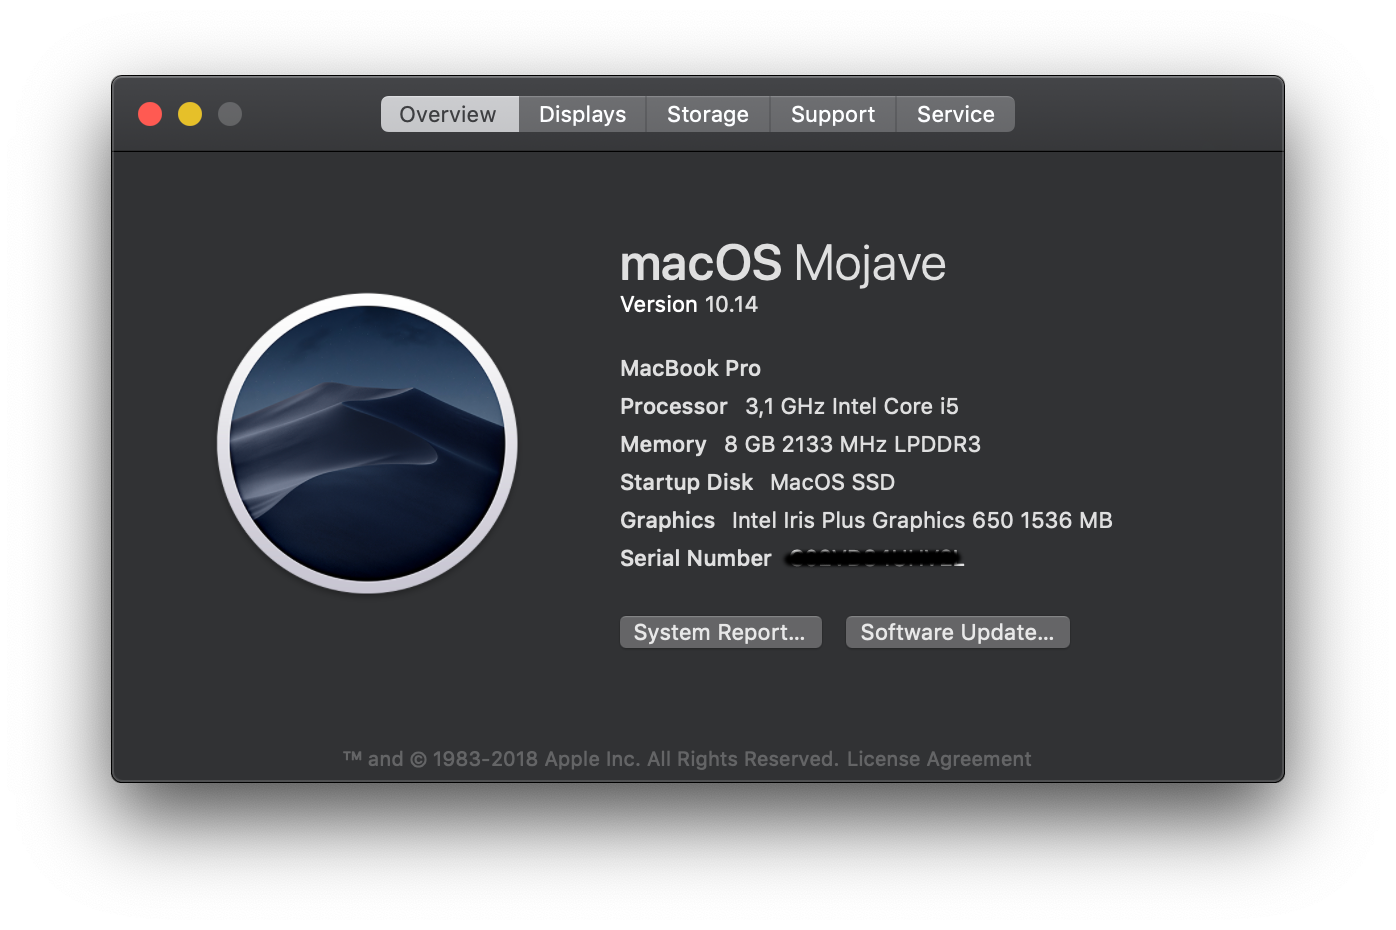 macOS Mojave release